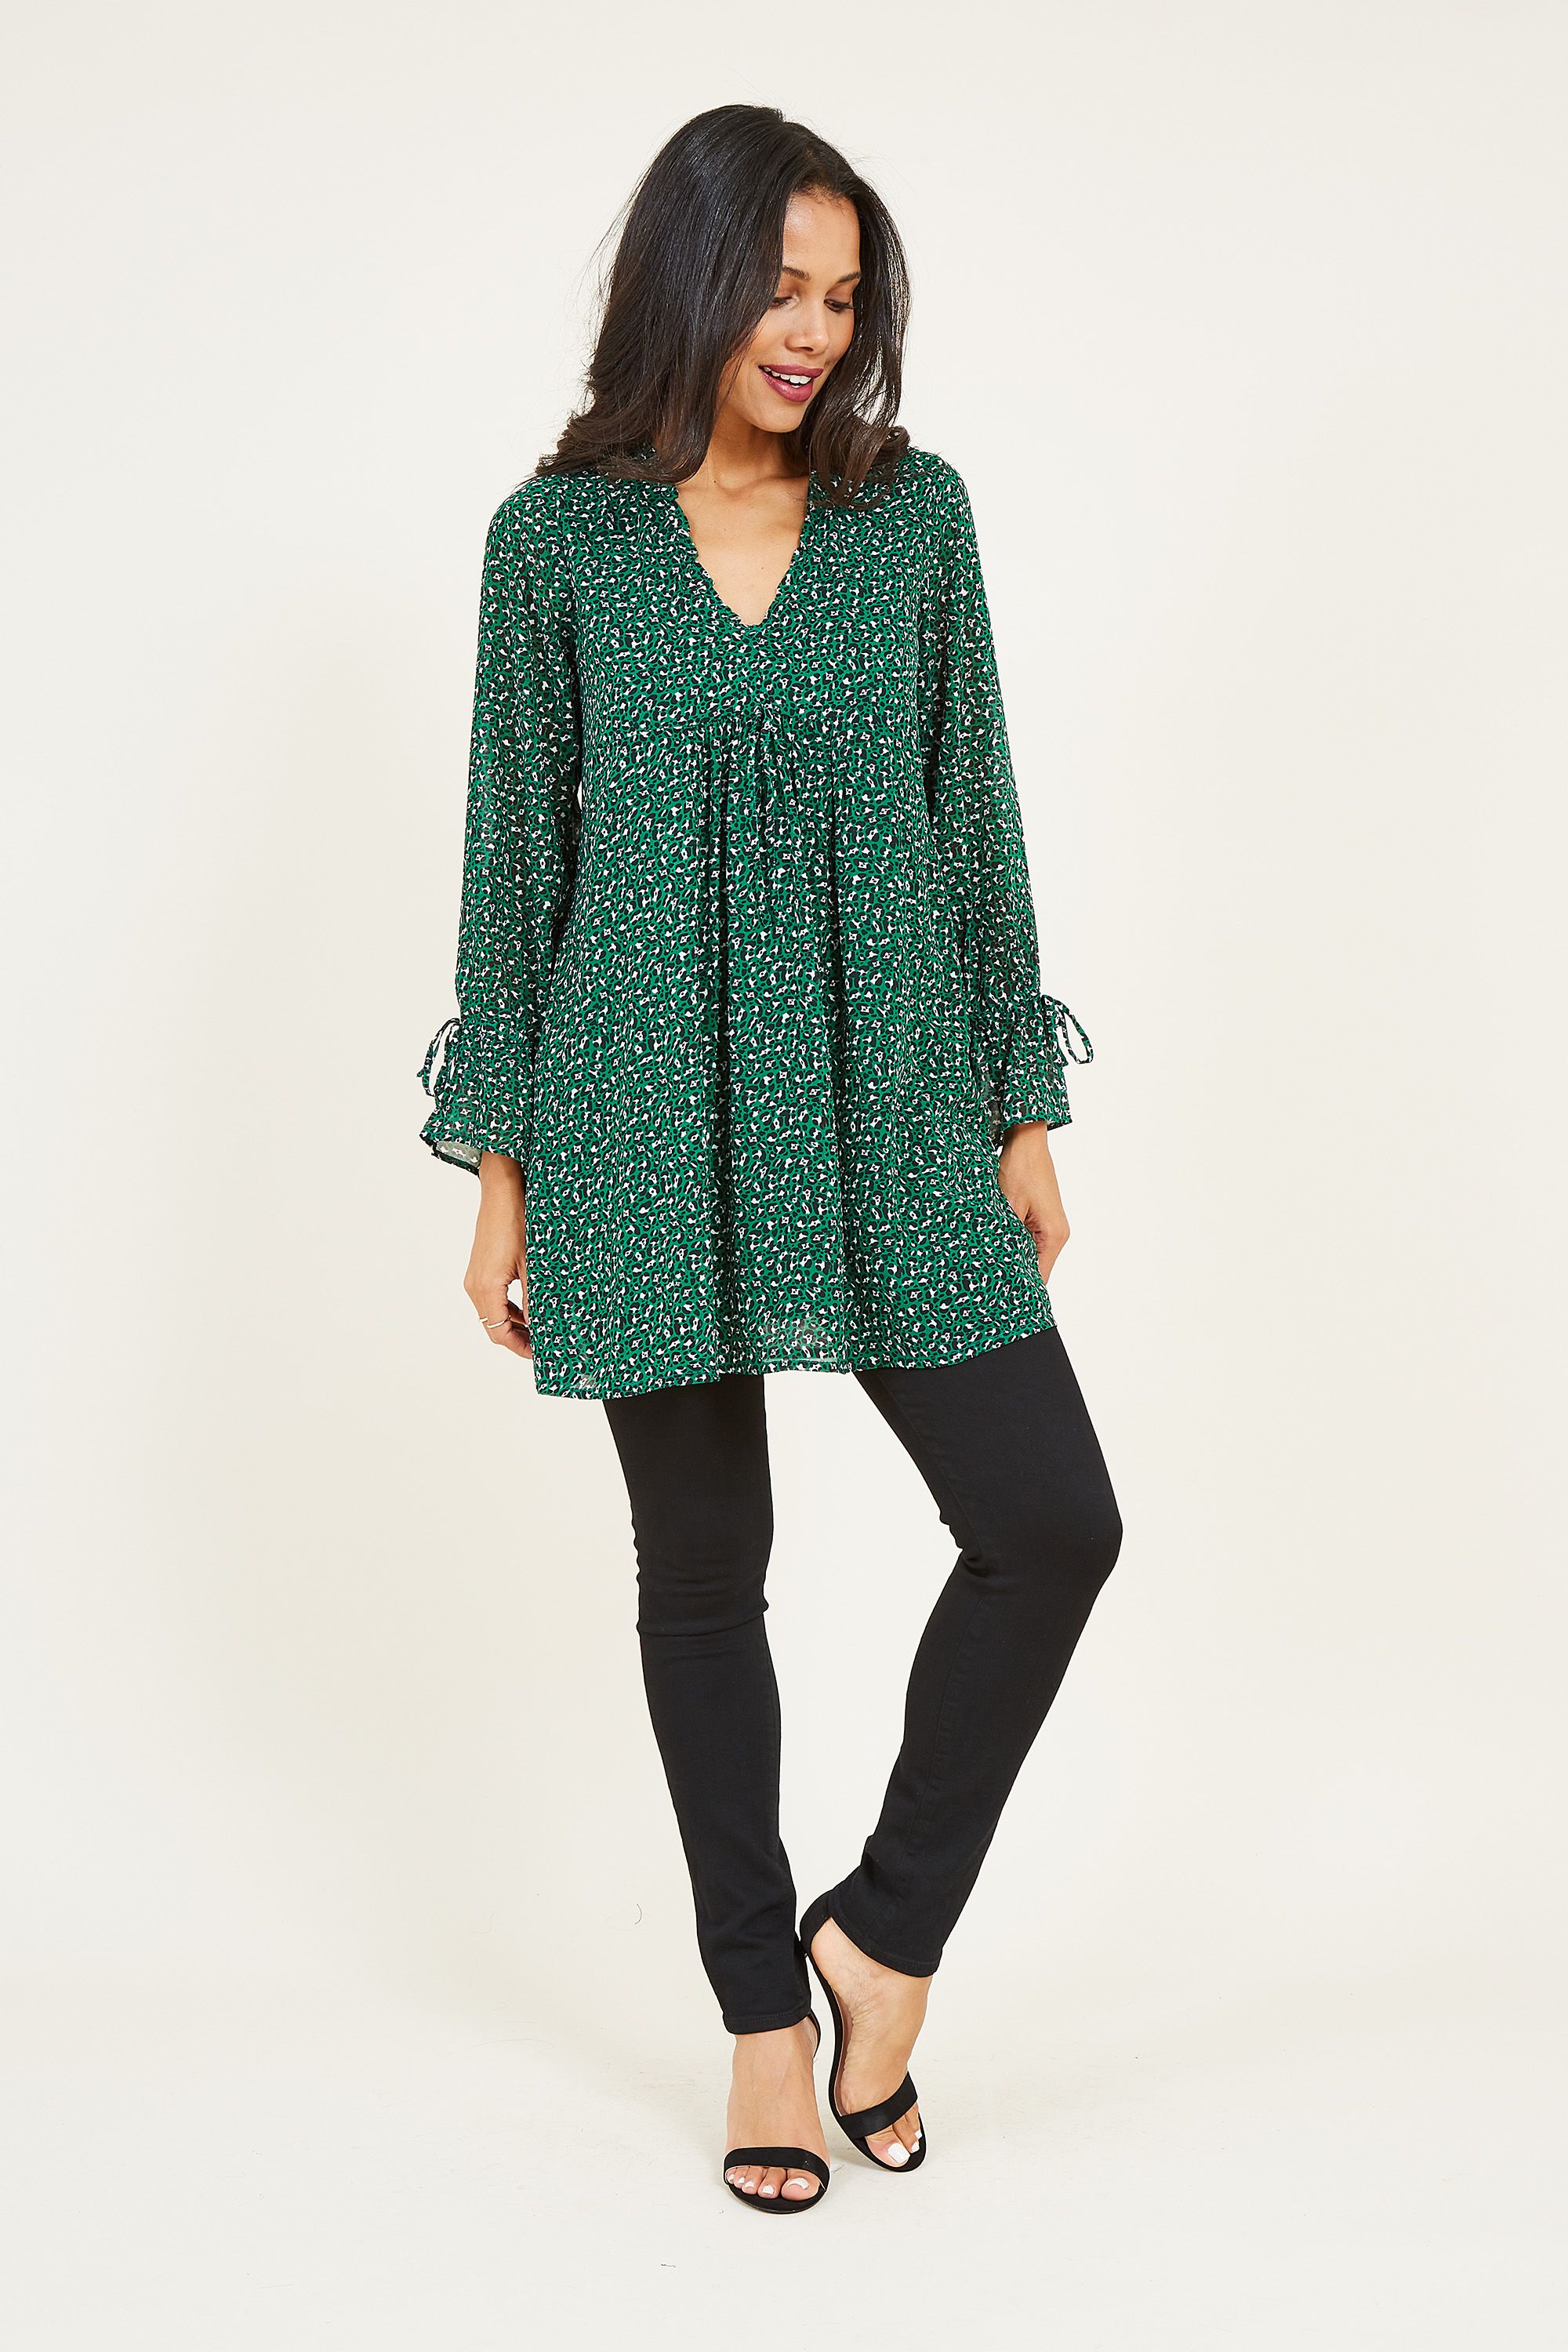 Strike a balance between comfort and style with our Leopard Tunic Dress. Detailed with an animal print with a wild edge, this casual dress is cut in a relaxed, knee-length shape. Three-quarter-length sleeves offer a versatile feel, with a swing movement enhanced by the layered front. Give your look a modern finish with a pair of chunky boots.